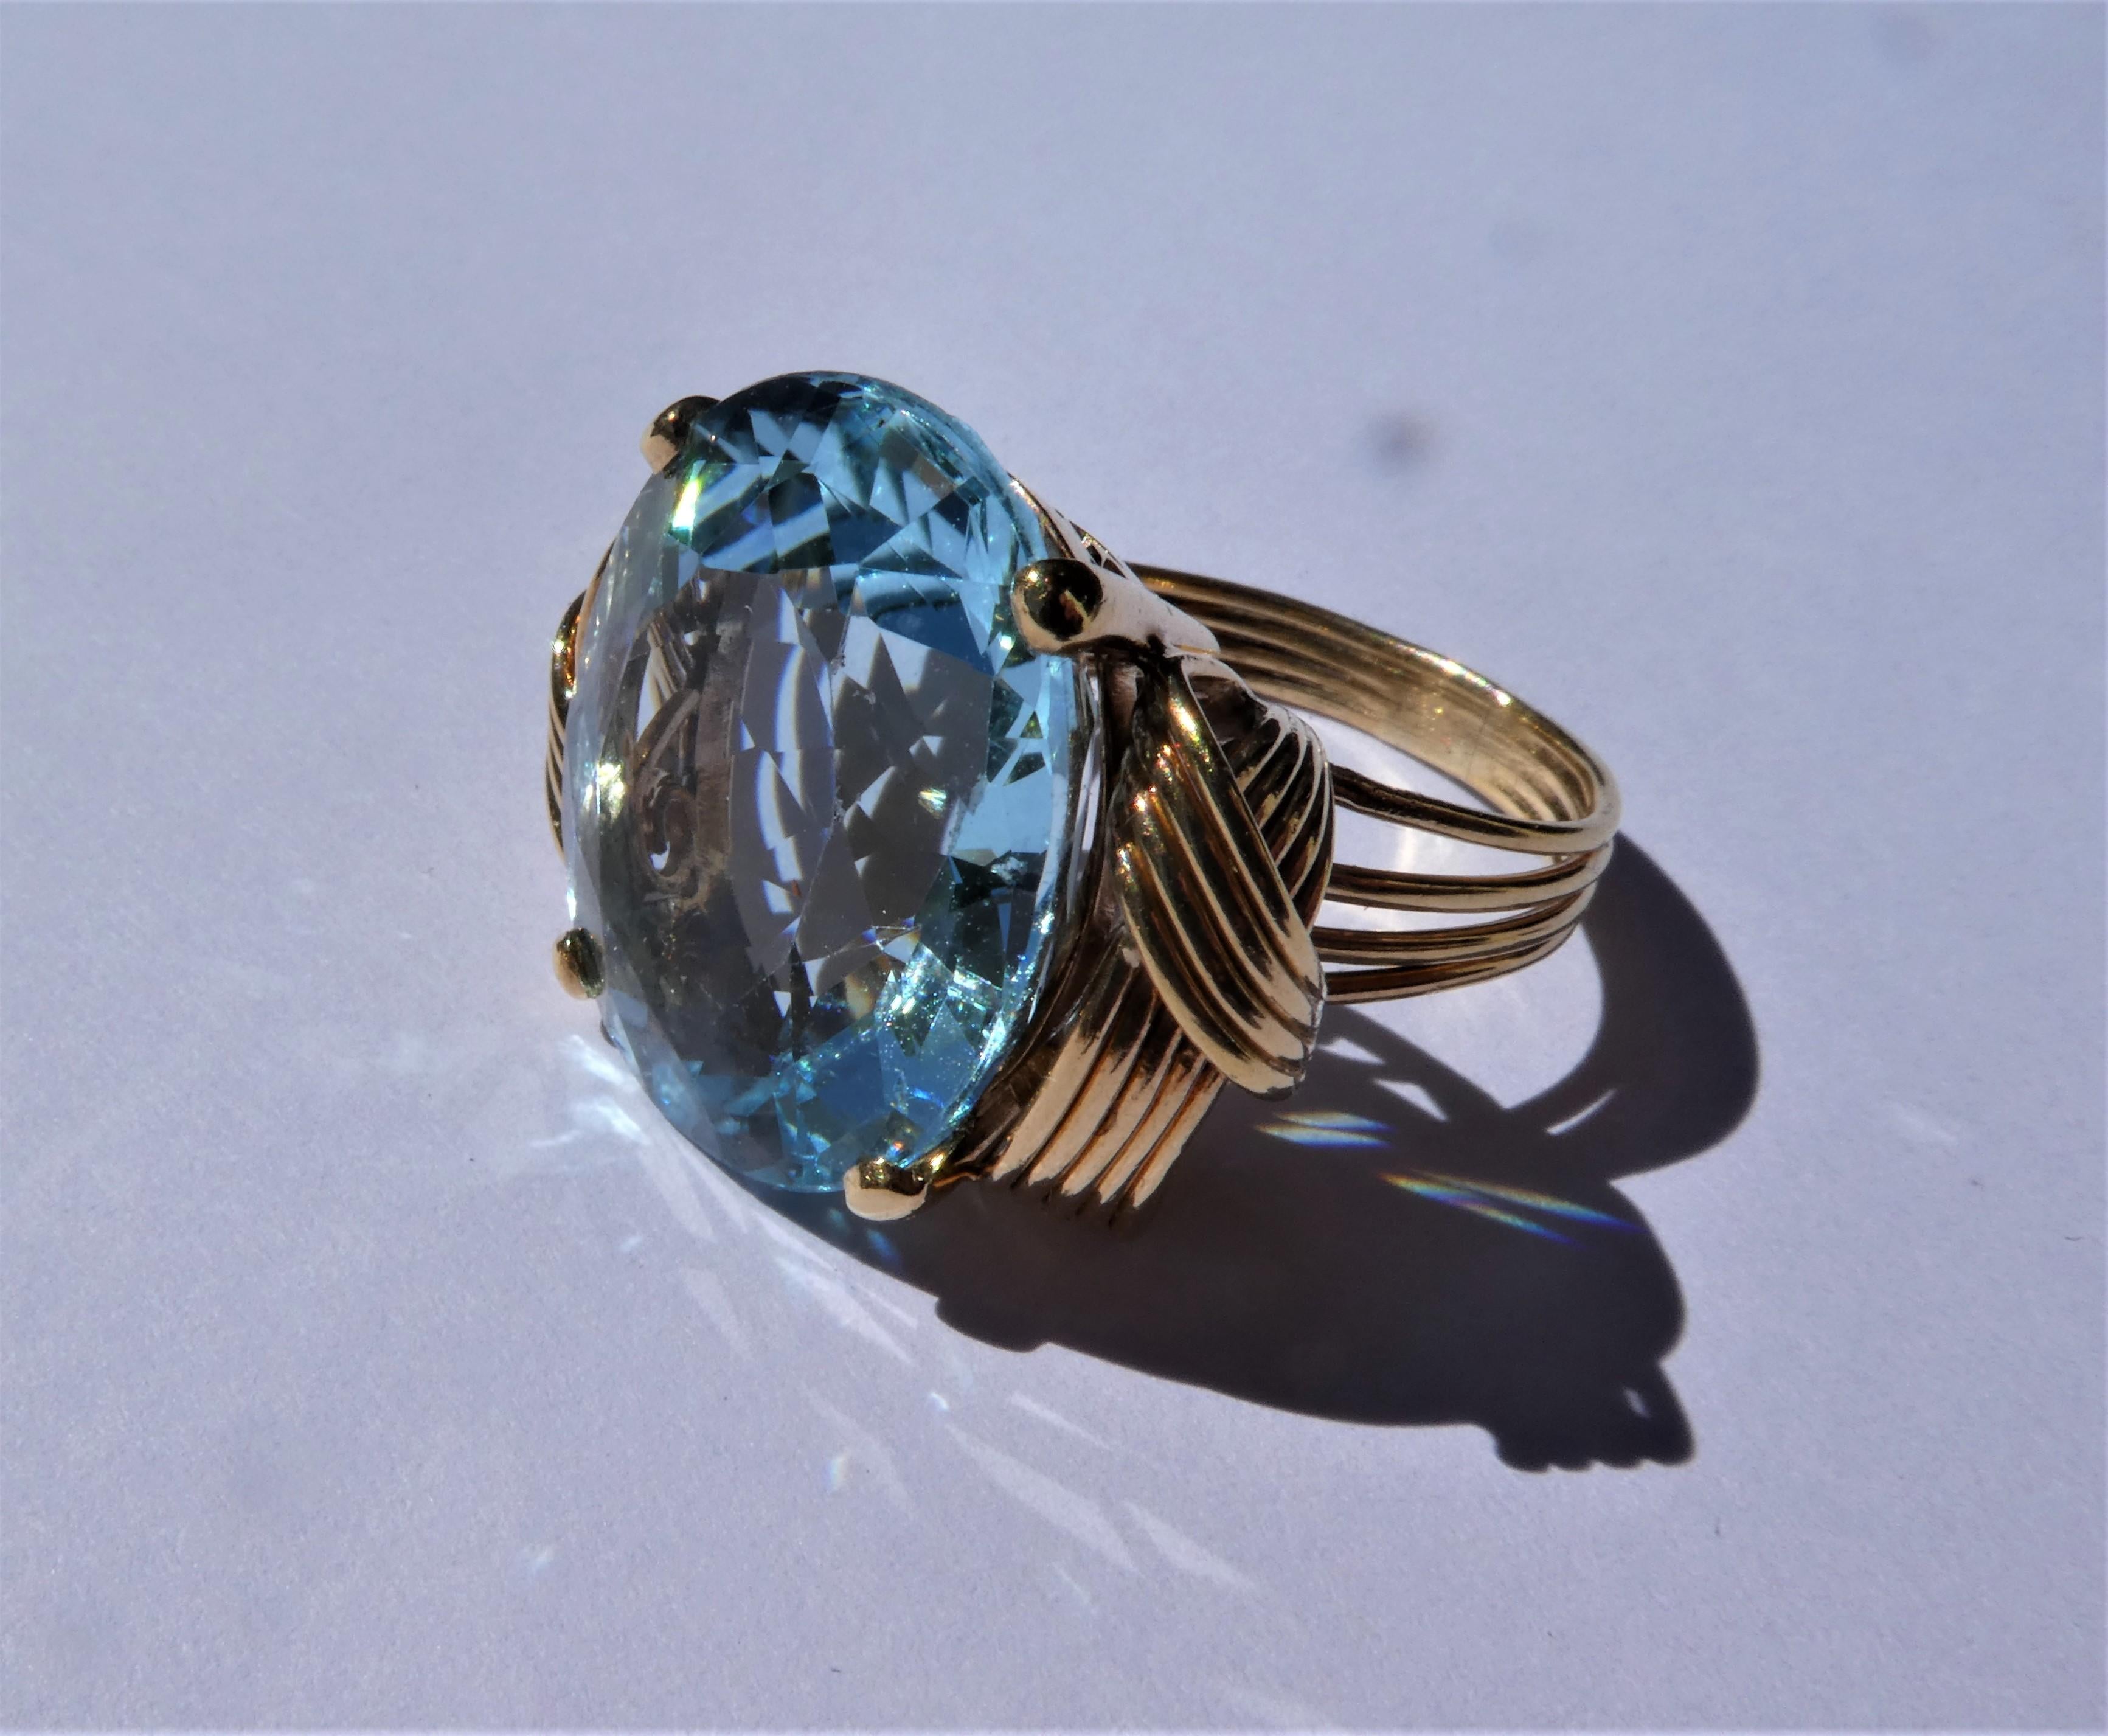 This cocktail ring was crafted in the 1950s in the United States in 14 karat rose gold. On the side it is decorated with a braided rilled band. The aquamarine of circa 20 carat has a vibrant strong blue colour in a slightly oval cut with the